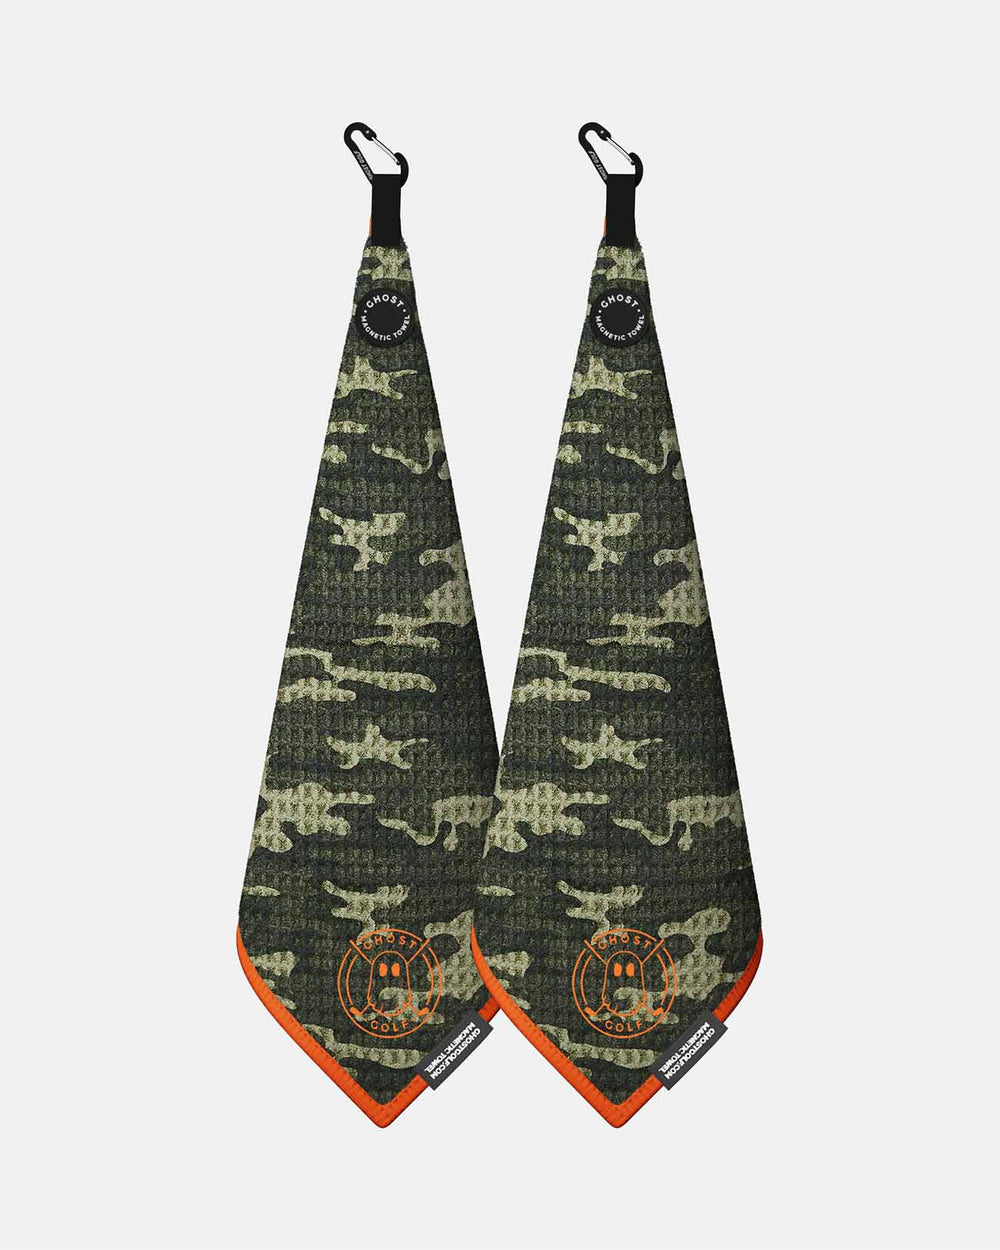 2 Greenside towels with Magnet Patch and Carabiner. Color Forest Camo